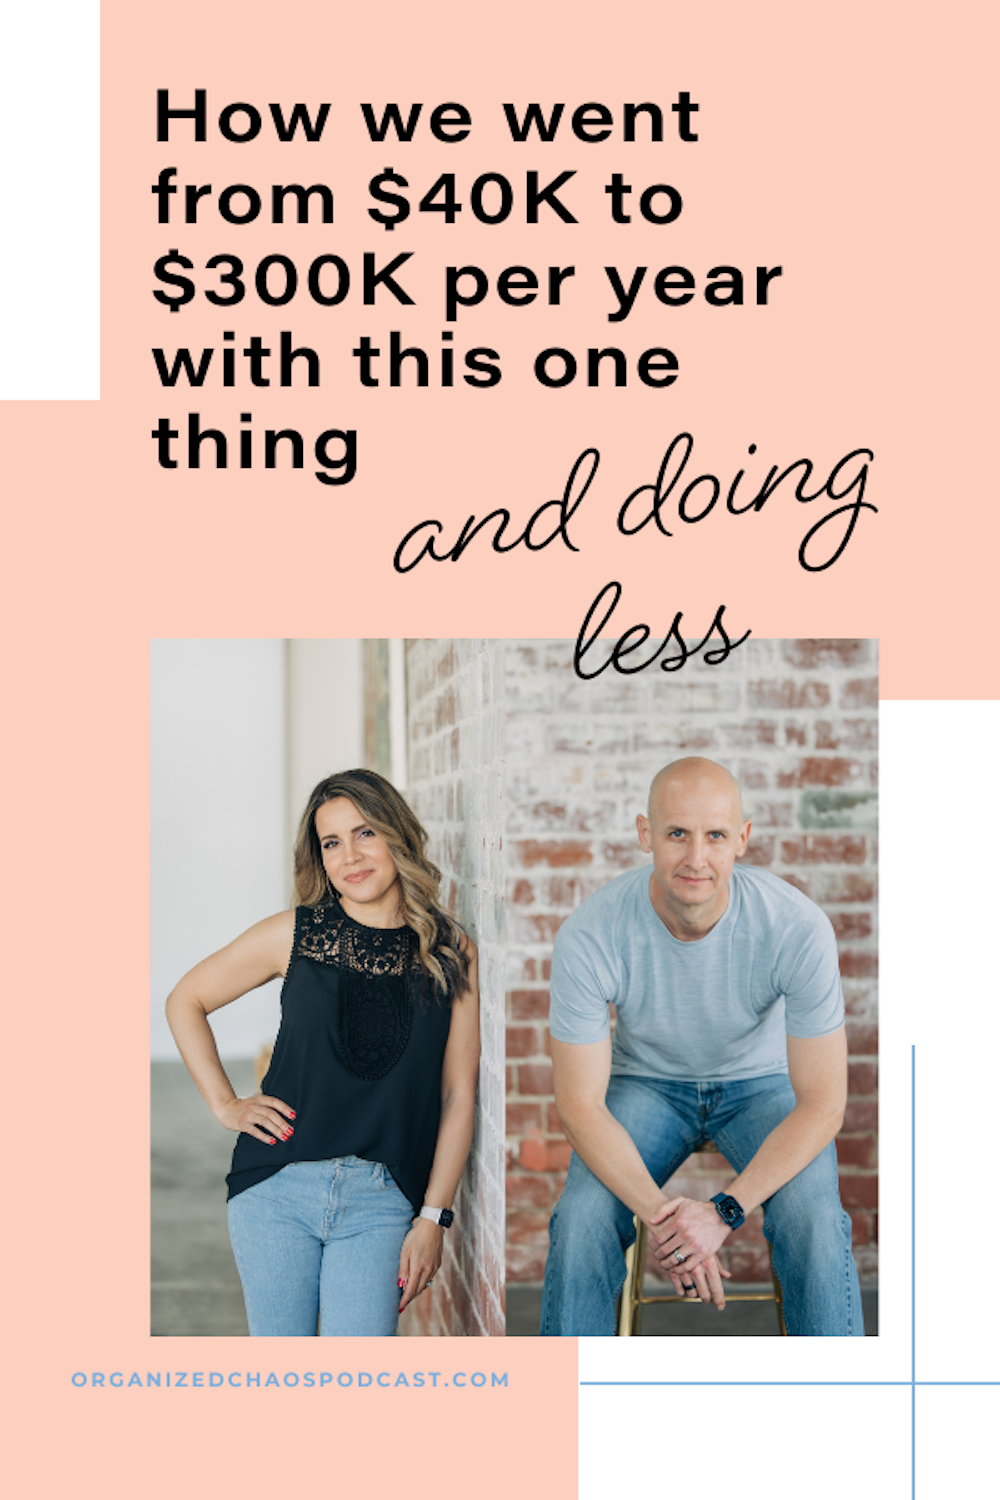 How We Went From $40K to $300K Per Year in Our Biz With This One Thing...And Doing Less